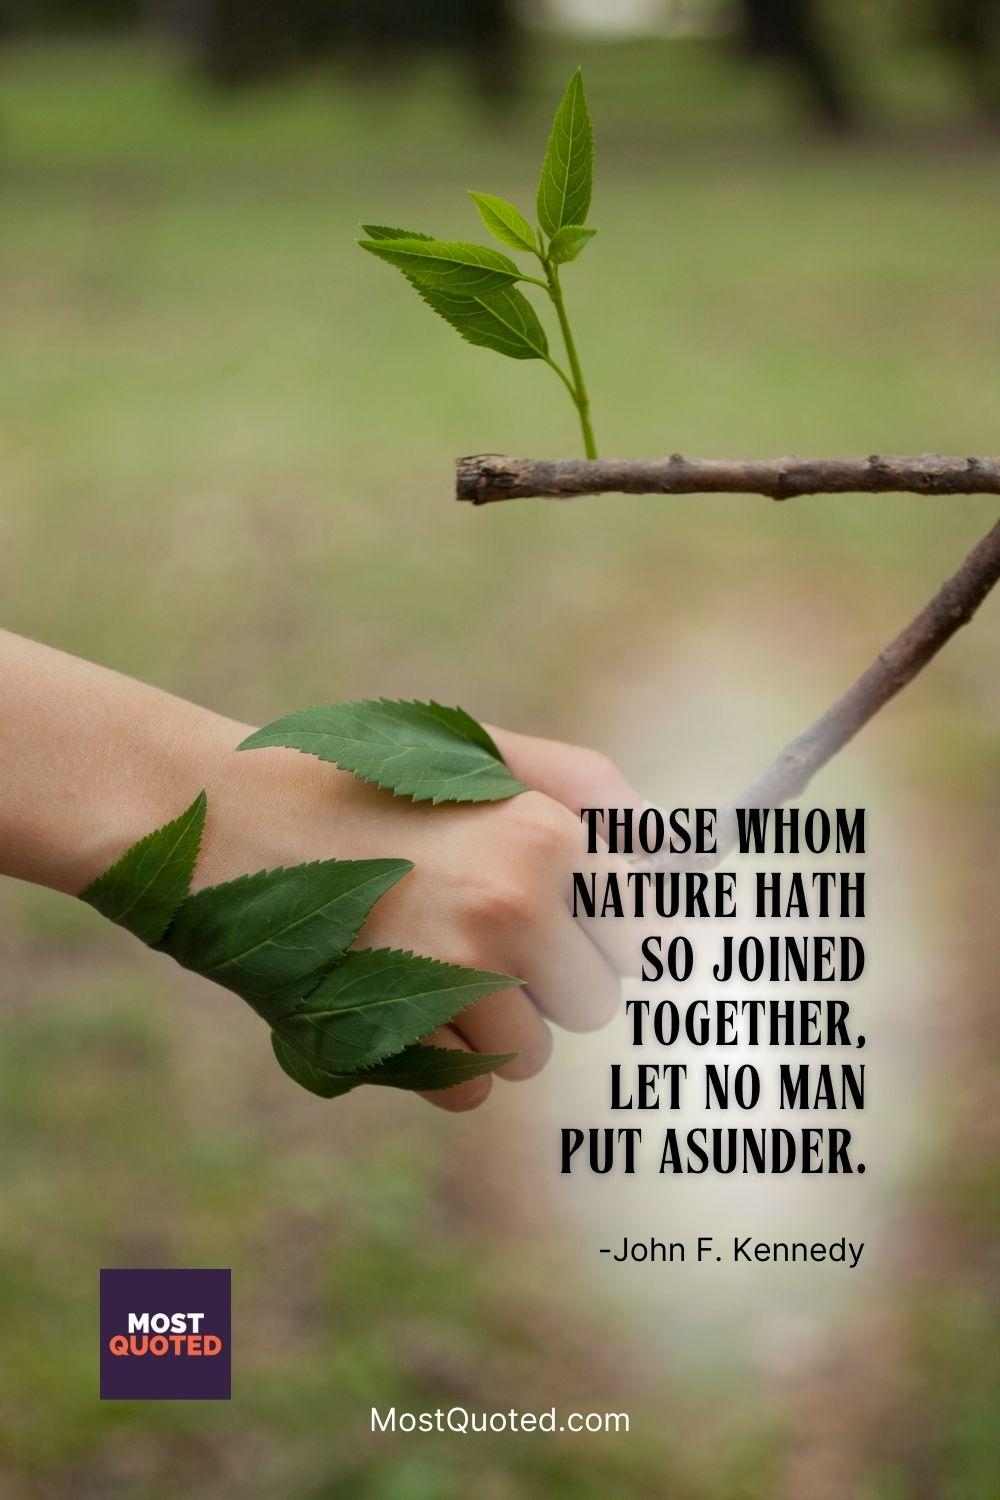 Those whom nature hath so joined together, let no man put asunder. - John F. Kennedy